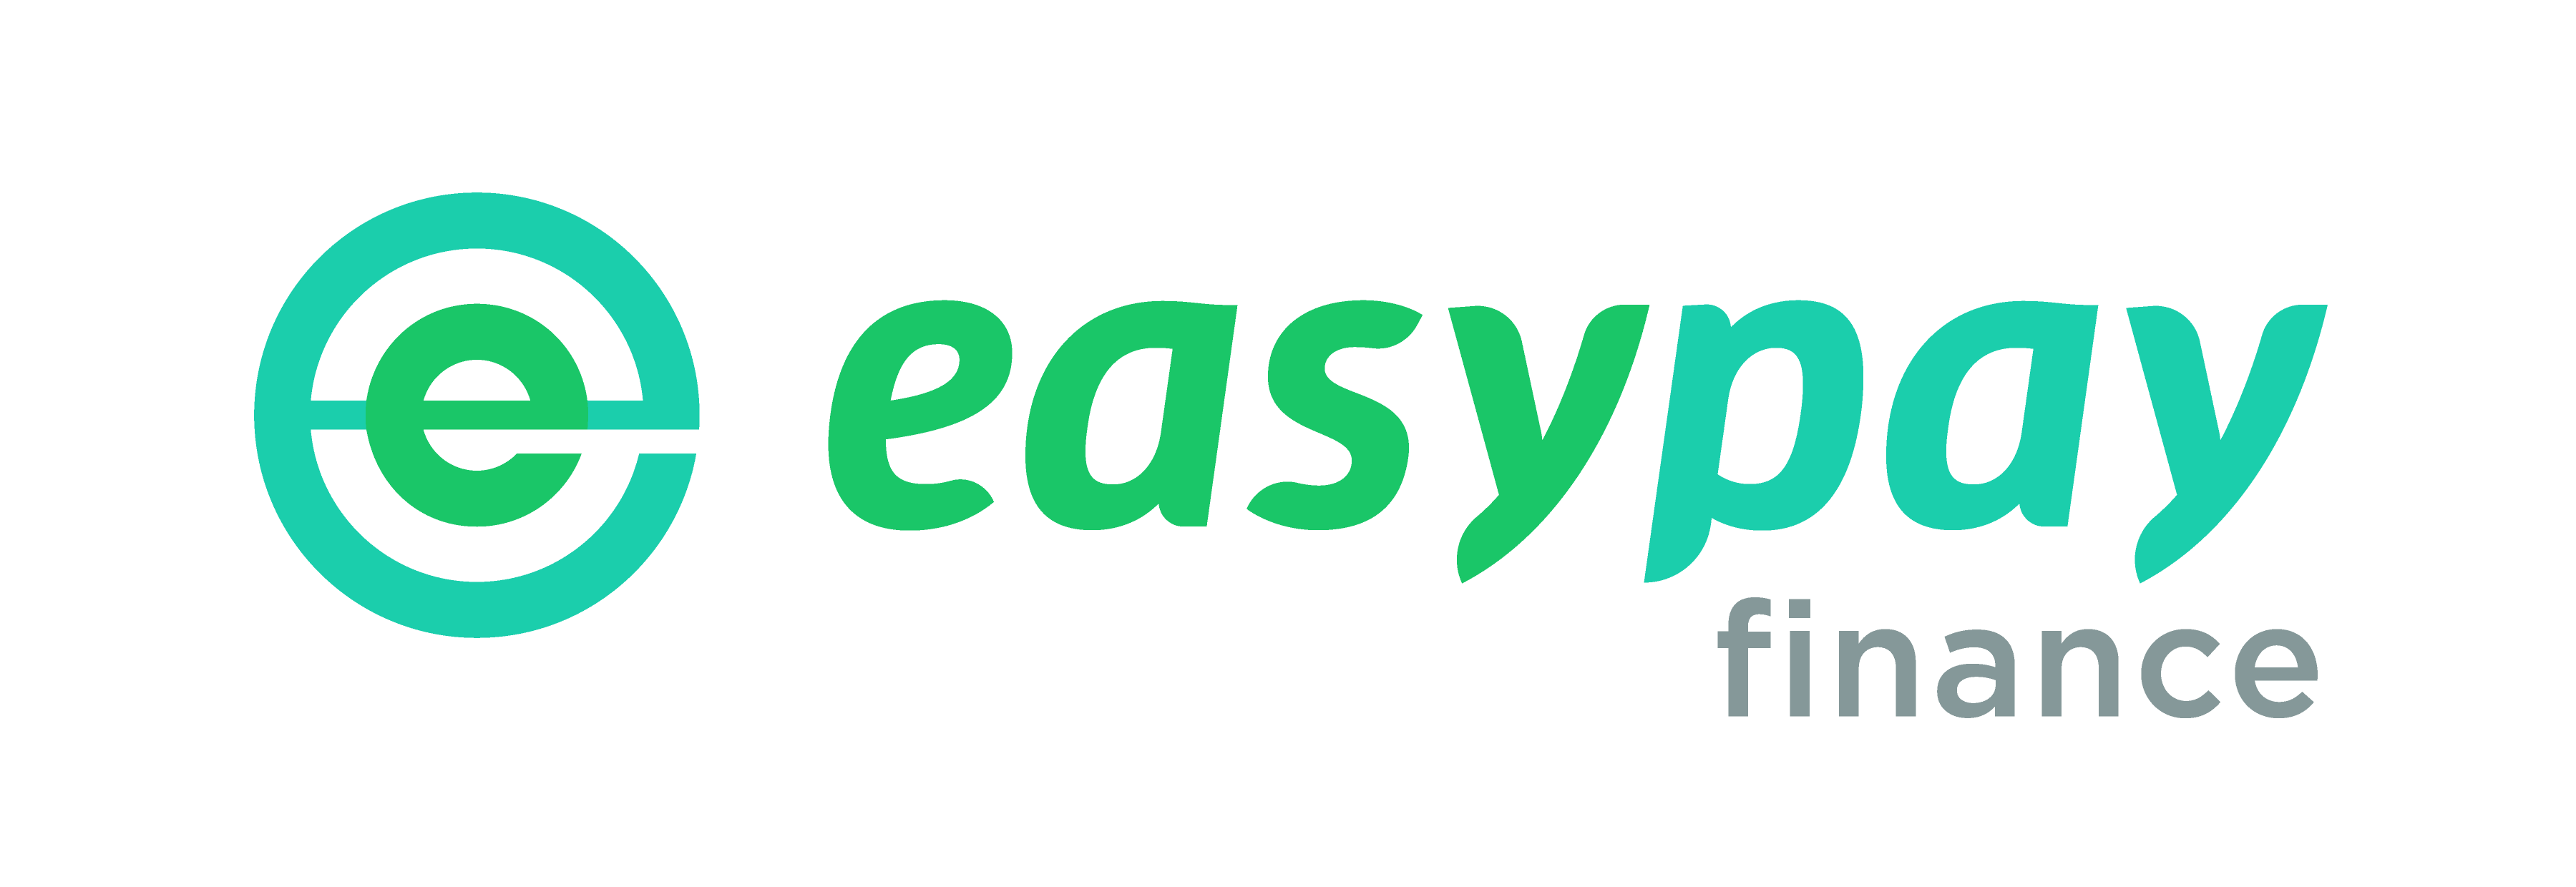 easypay apply now link